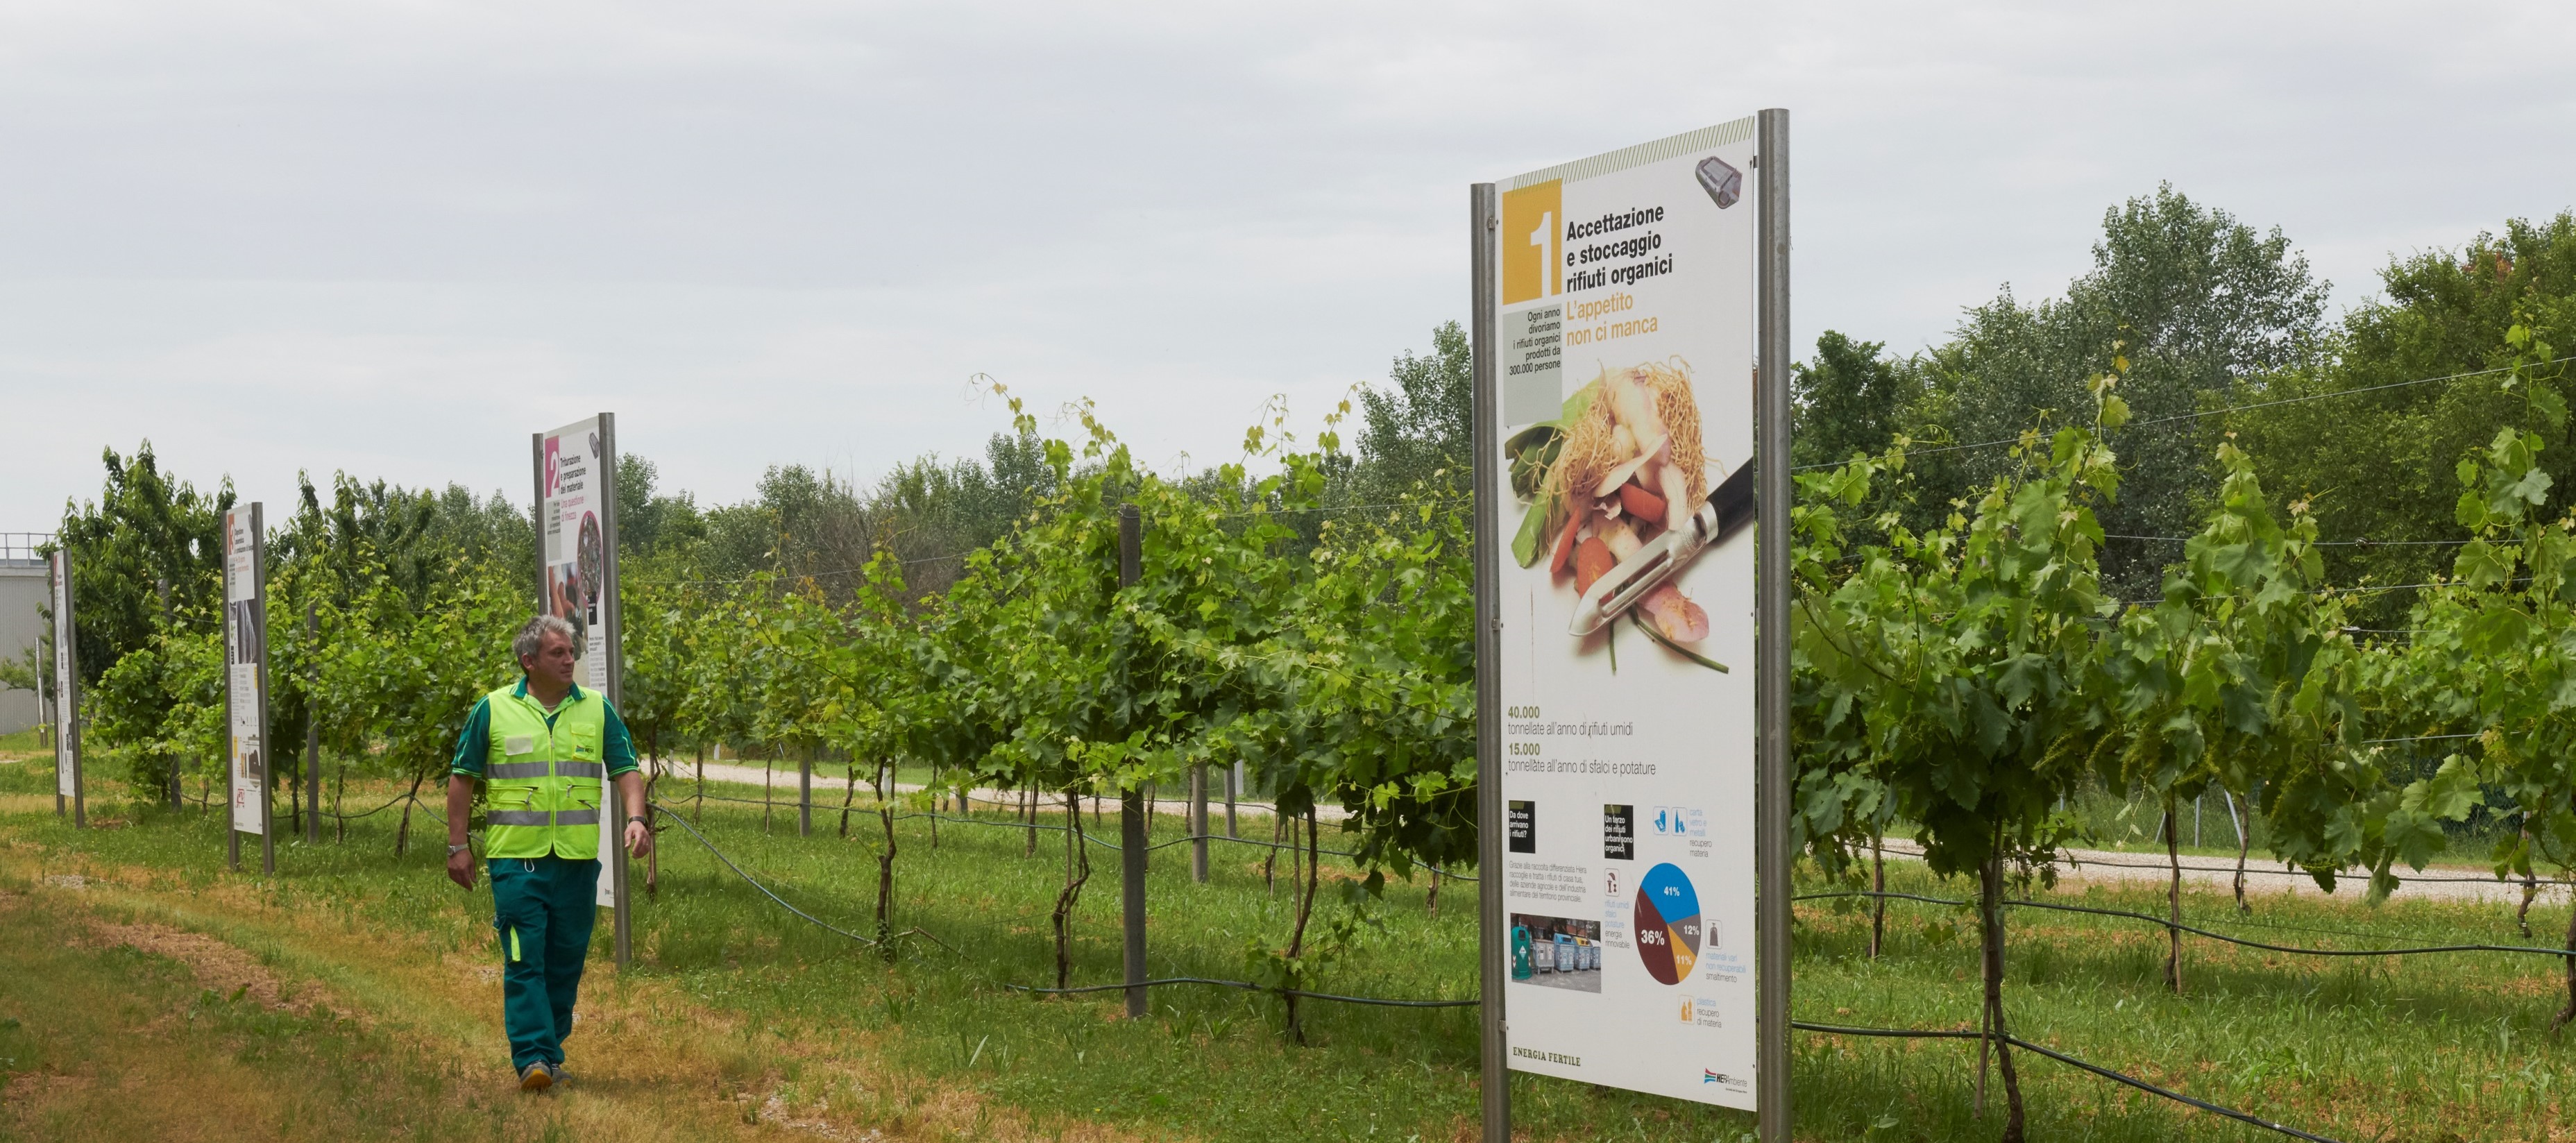 Voltana Anaerobic digestion and composting plant visitor pathway